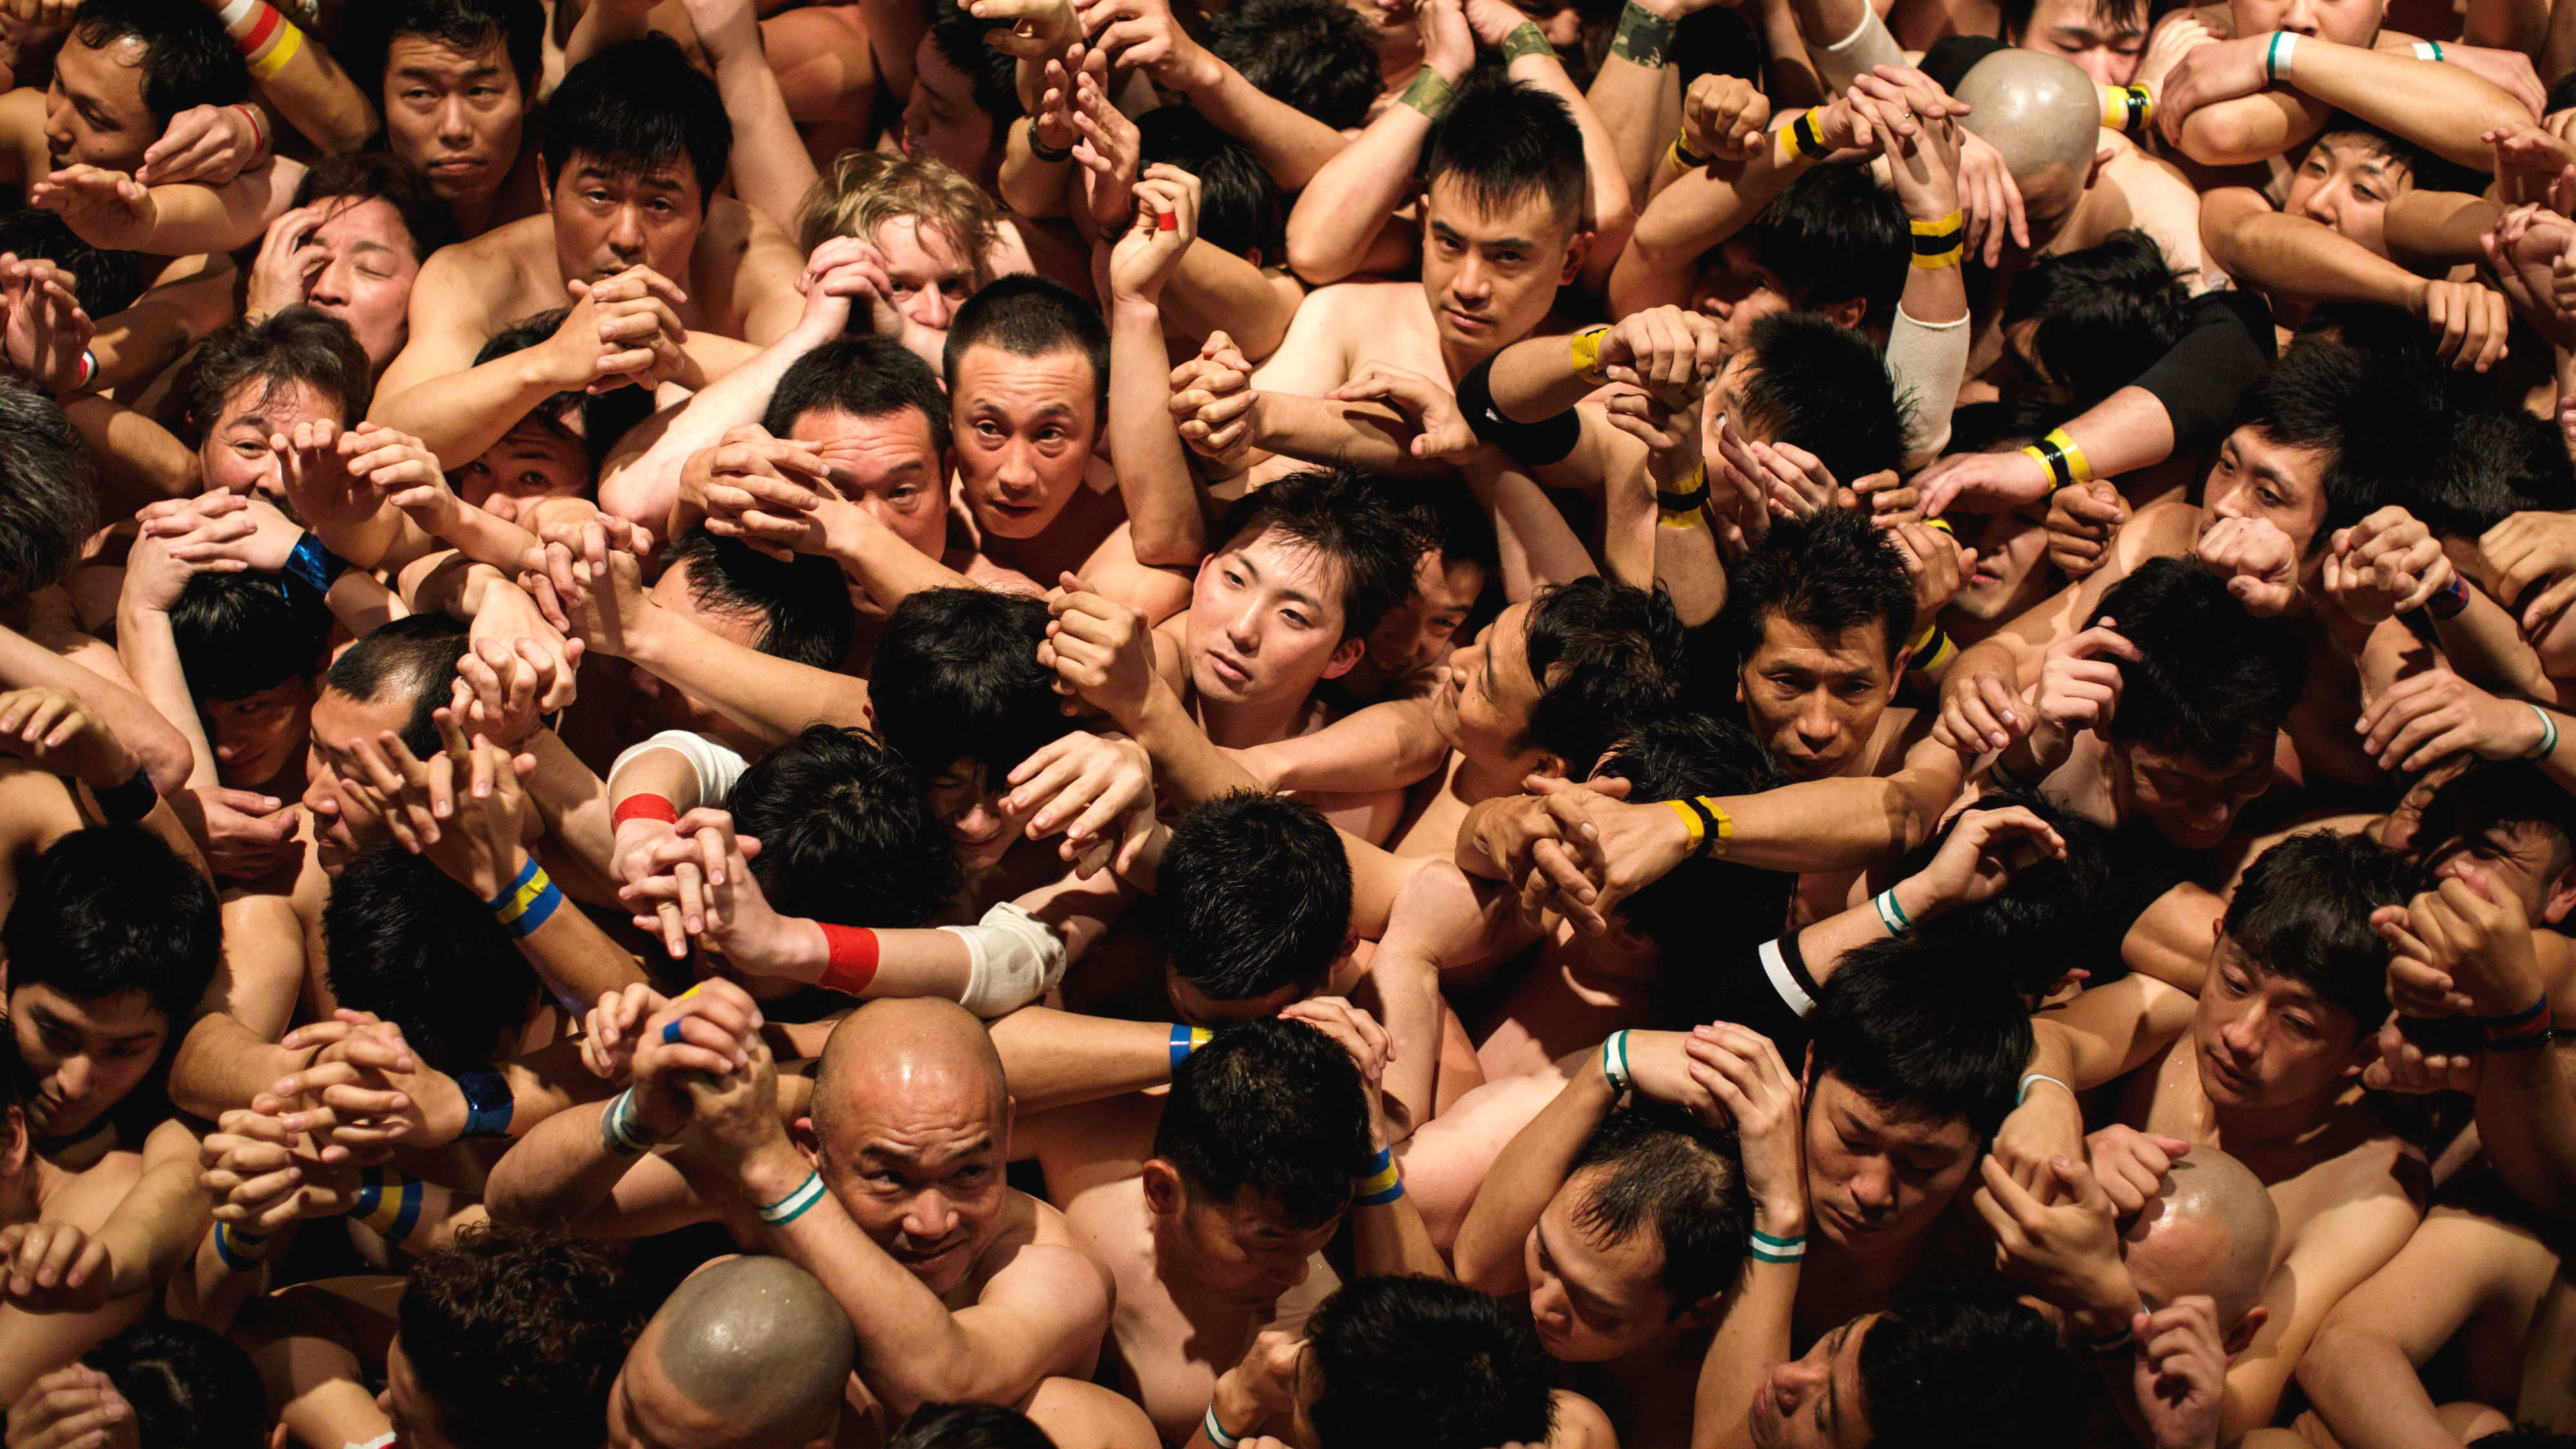 Worshippers bare all at Saidaiji Temple in Japan to fight for lucky charms during the Hadaka Matsuri festival